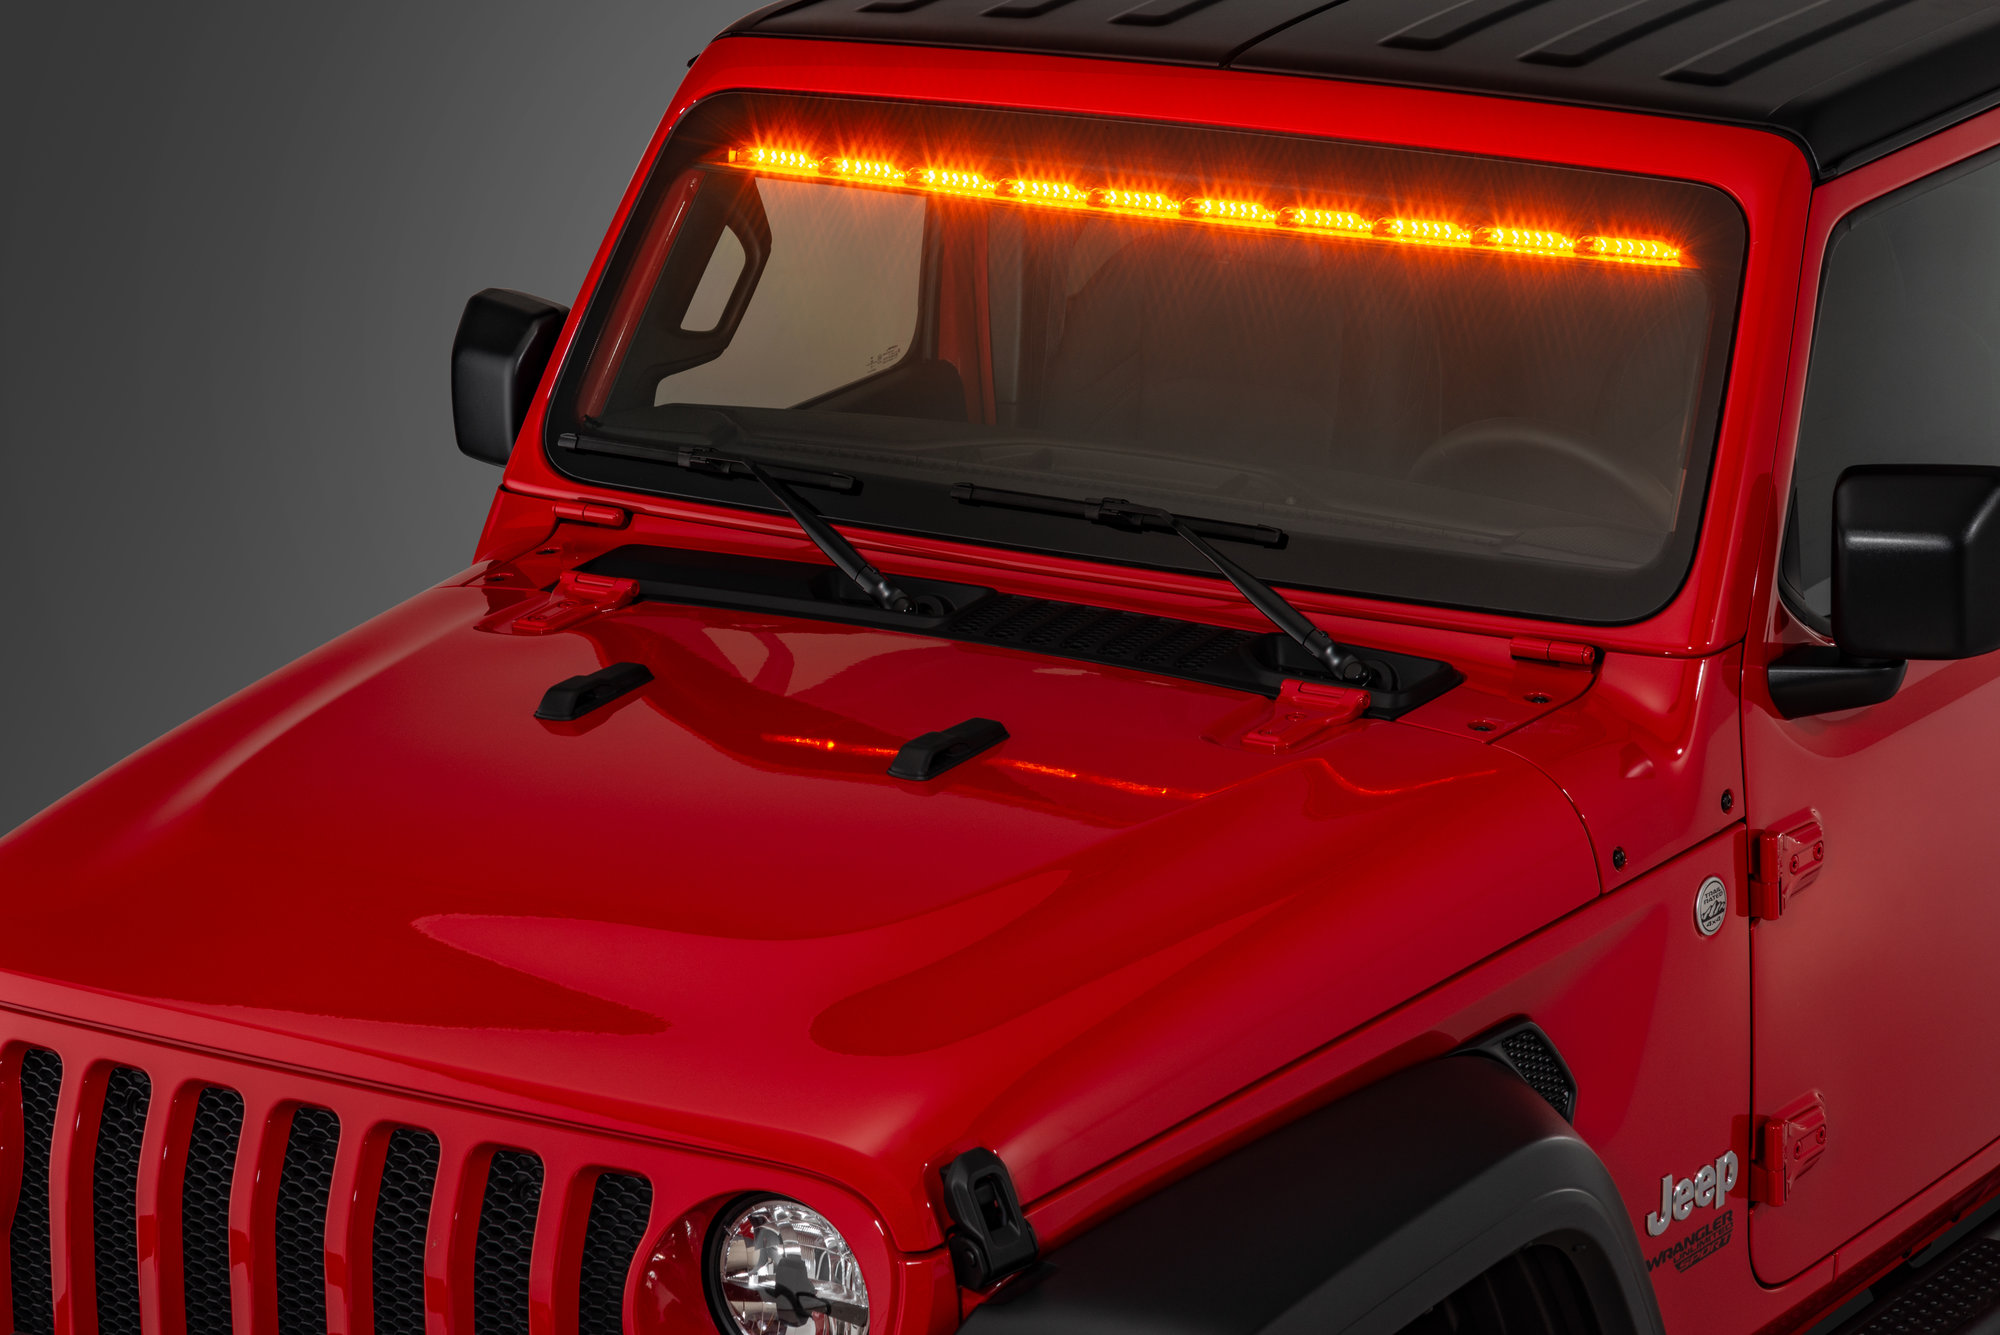 https://www.quadratec.com/sites/default/files/styles/product_zoomed/public/product_images/quadratec-97109.1400-stealth-interior-windshield-light-bar-jeep-wrangler-jl-zoom-amber_0.jpg